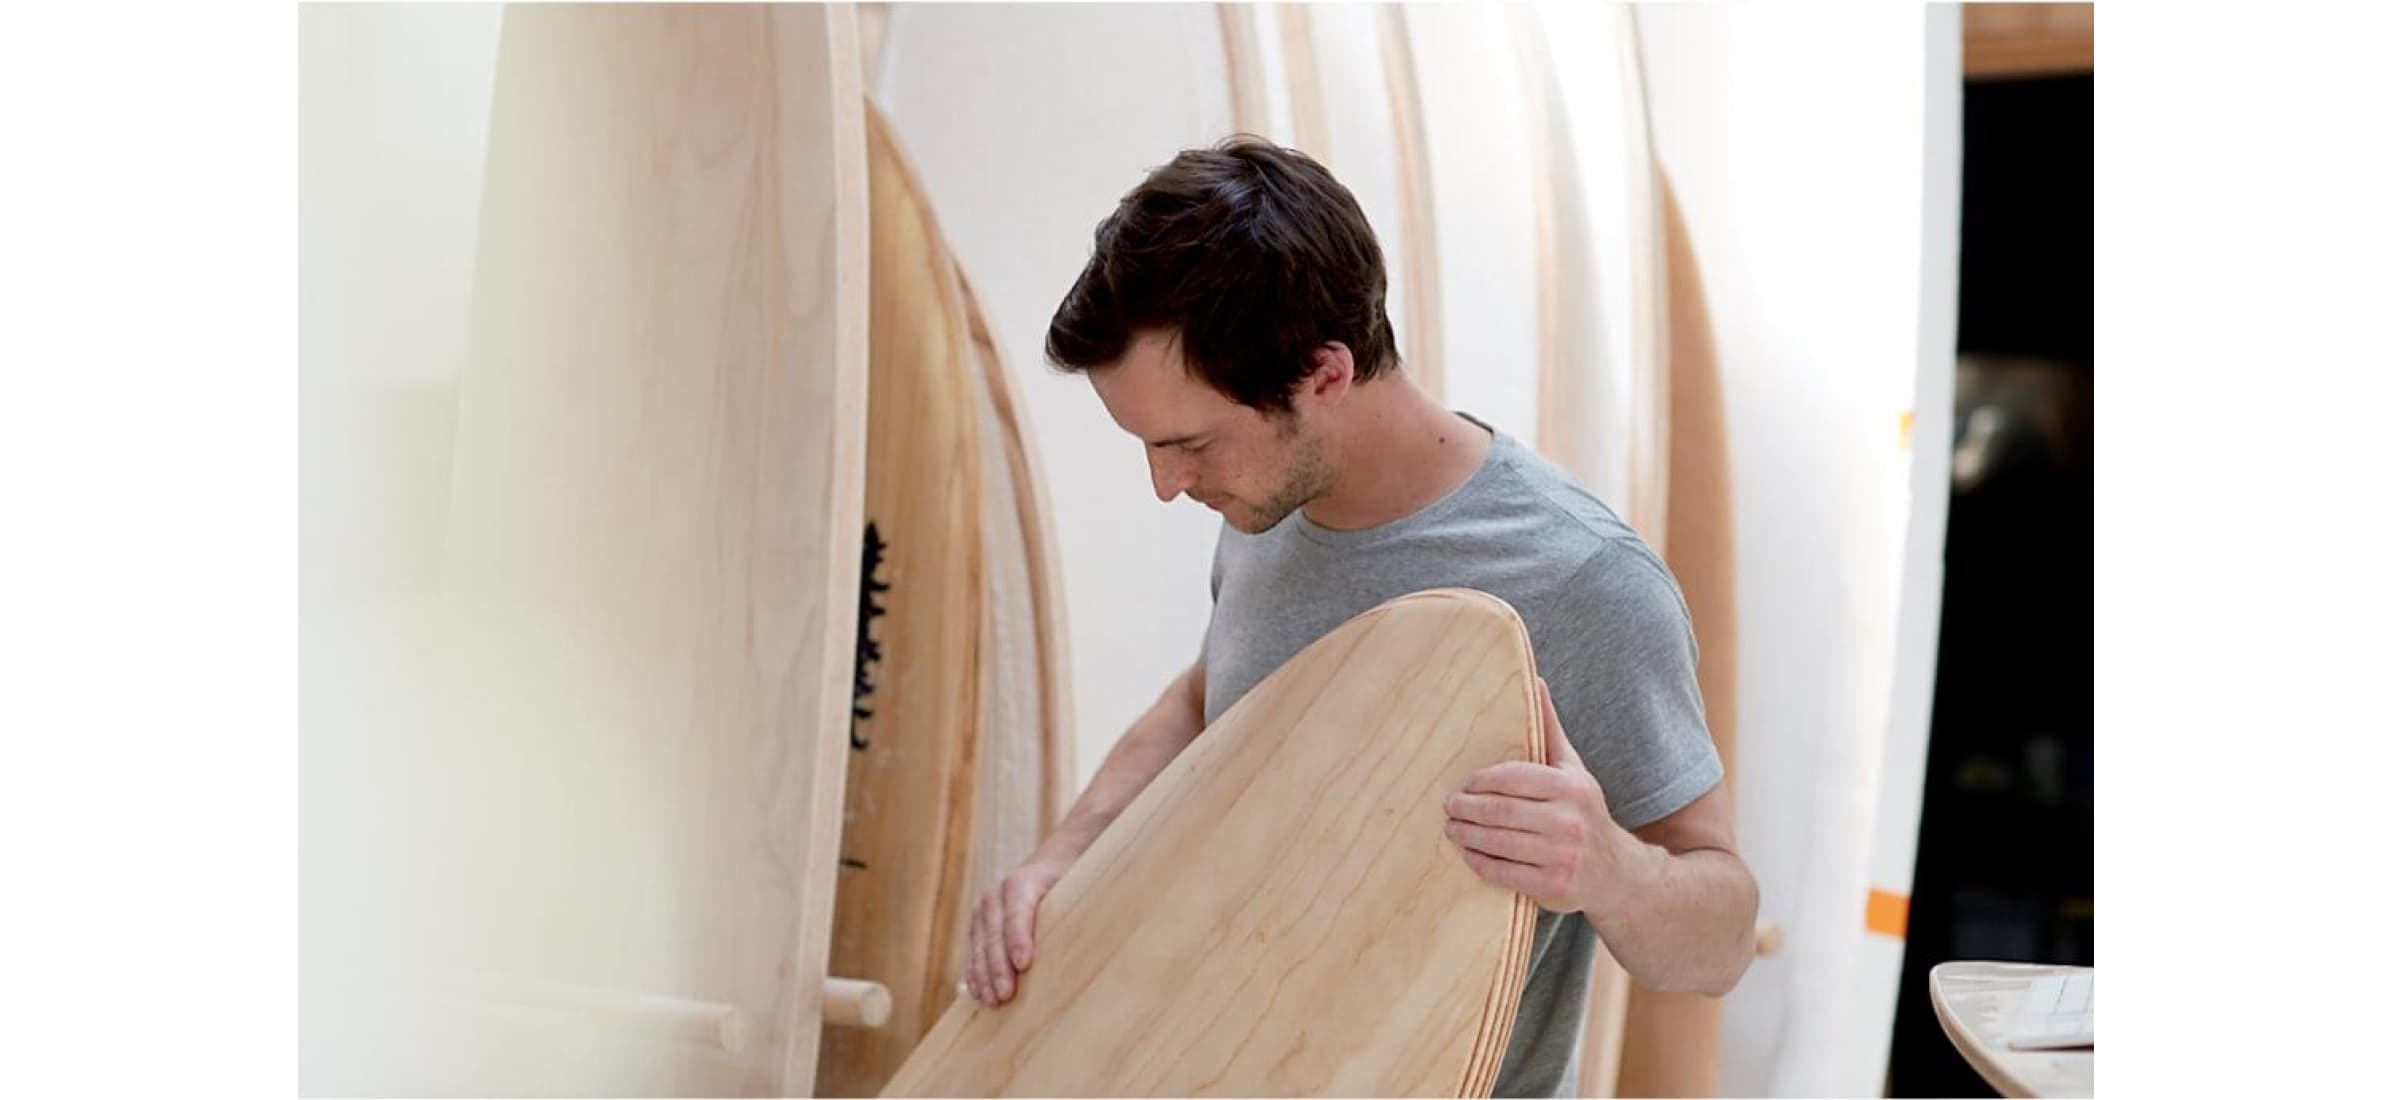 Jack putting one of their wooden surfboards in a rack of other surfboards of various sizes.